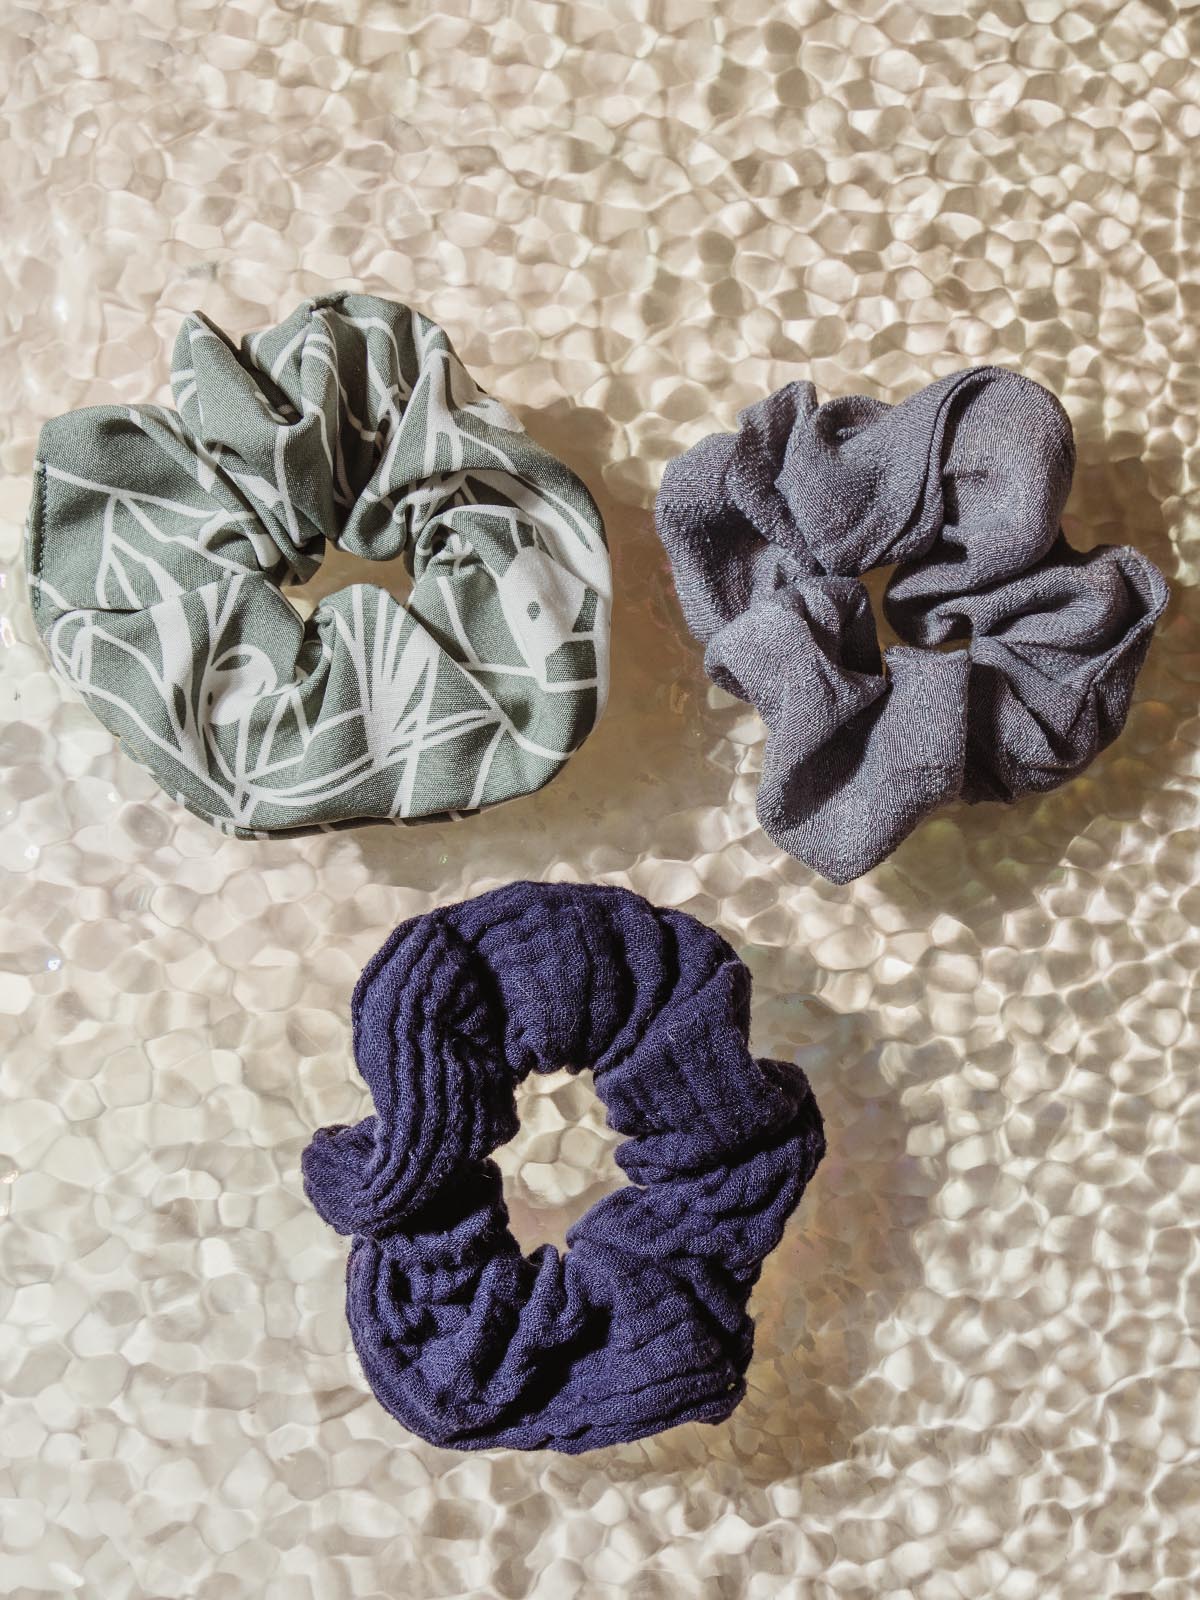 Three scrunchies laying on a table - one is blue, one is darker blue, one is green